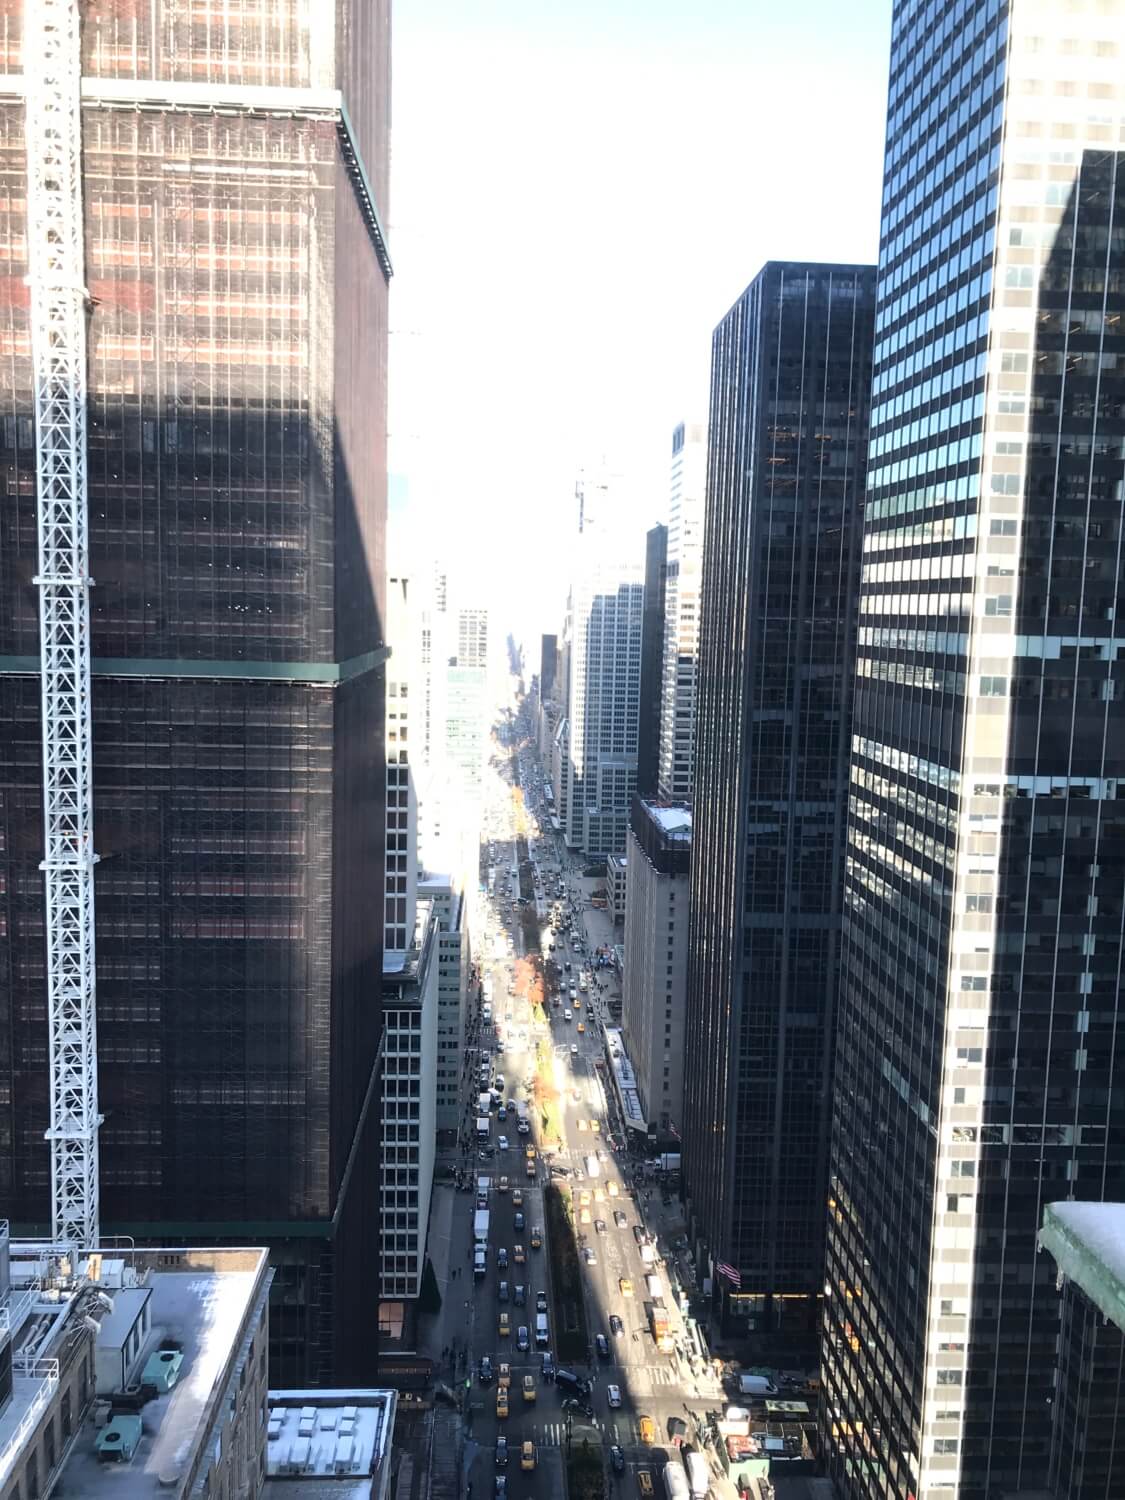 The view from New York office